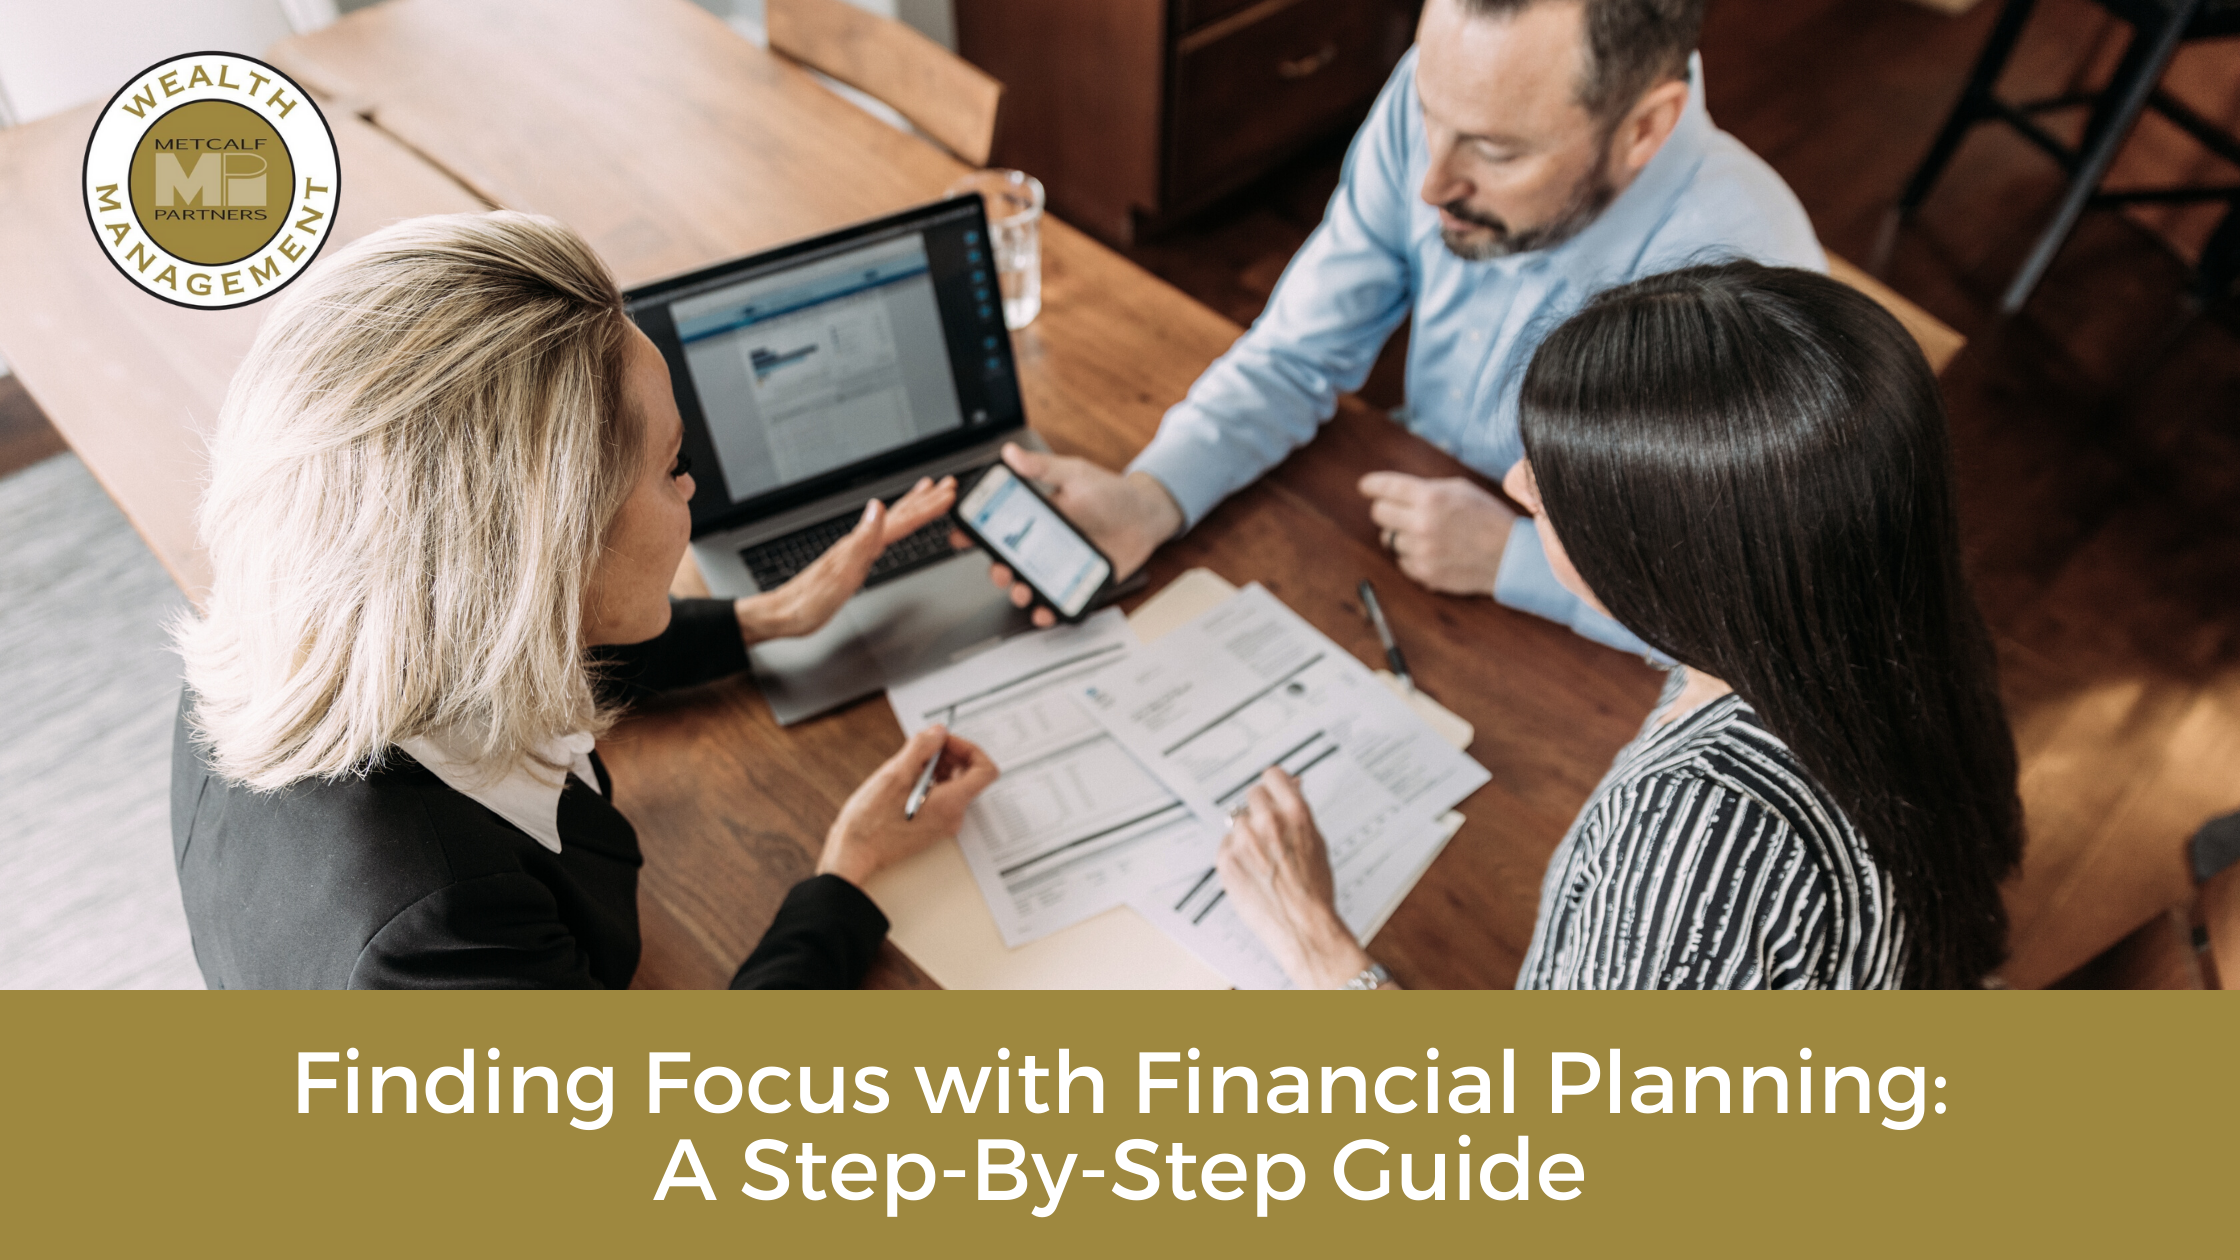 Featured image for “Finding Focus with Financial Planning: A Step-By-Step Guide”